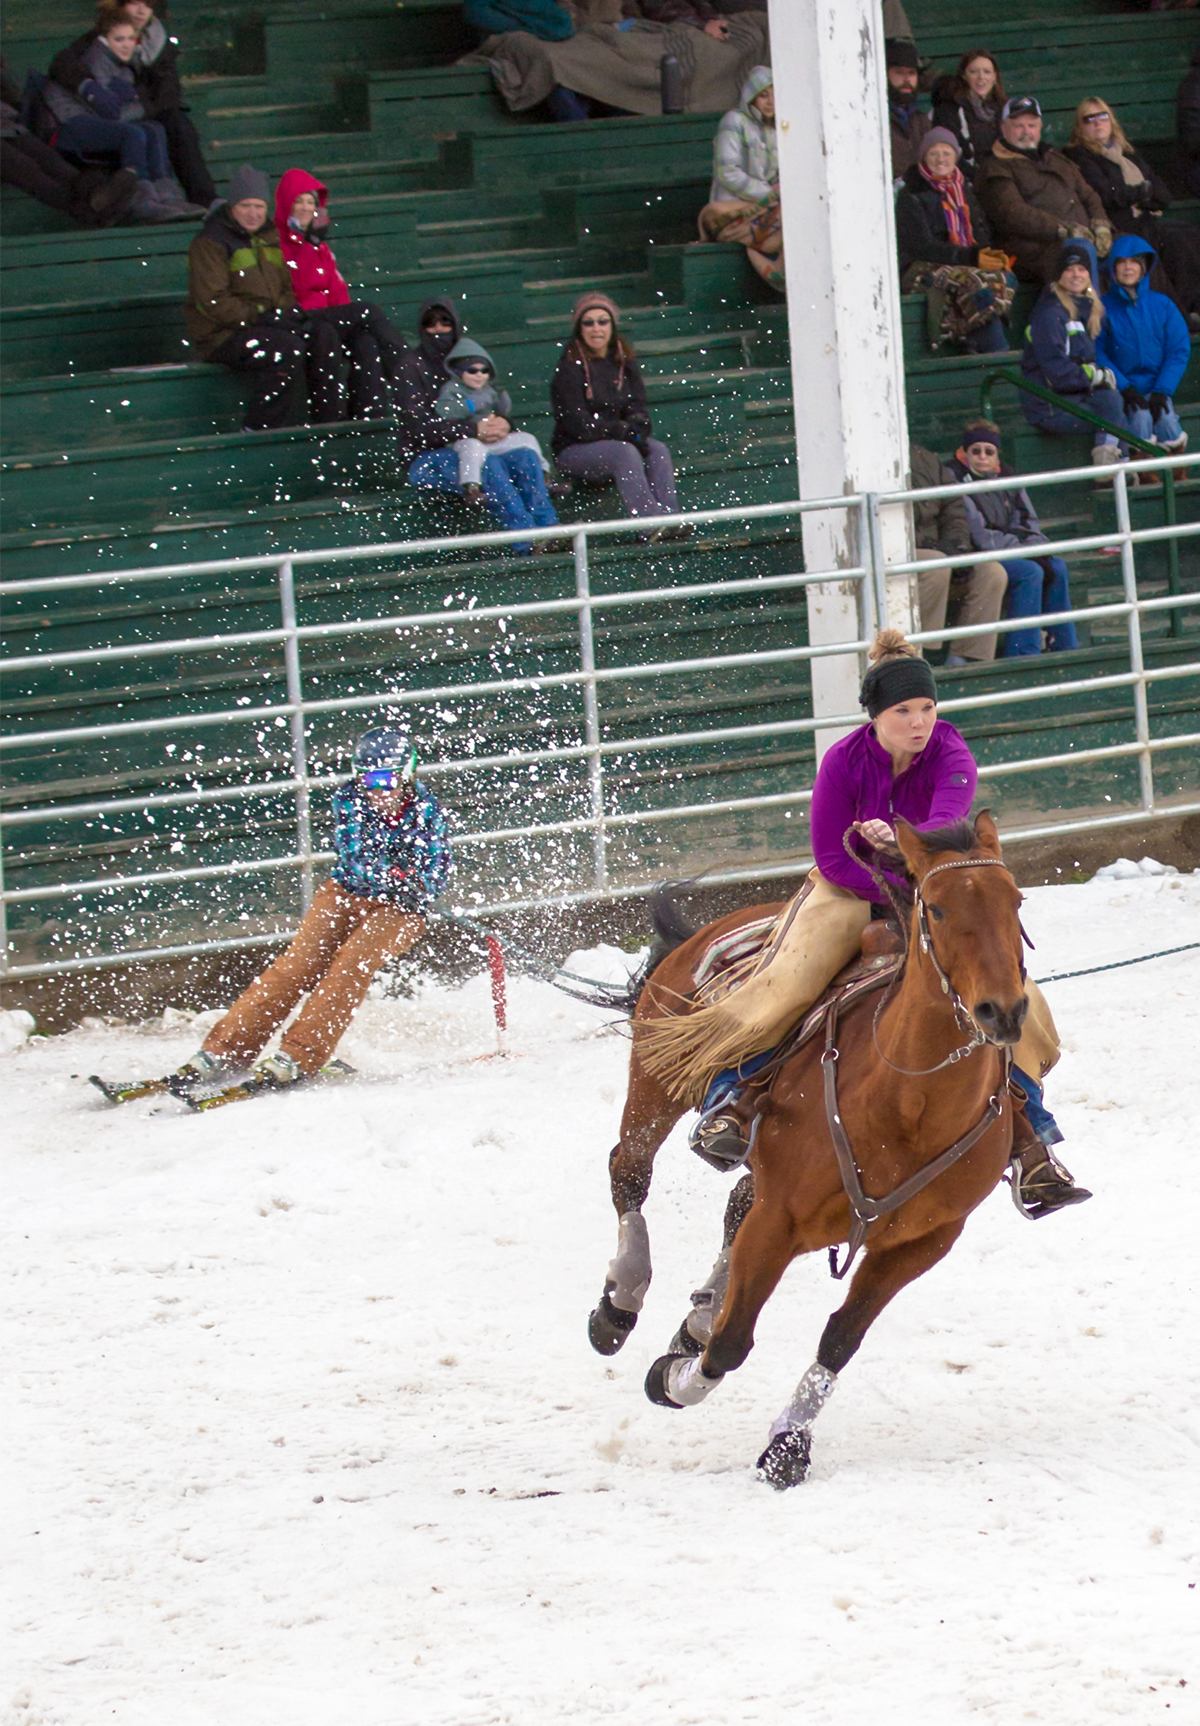 And They're Off ! Skijoring in Sandpoint, ID Winter Carnival 2014 via J5MM.com